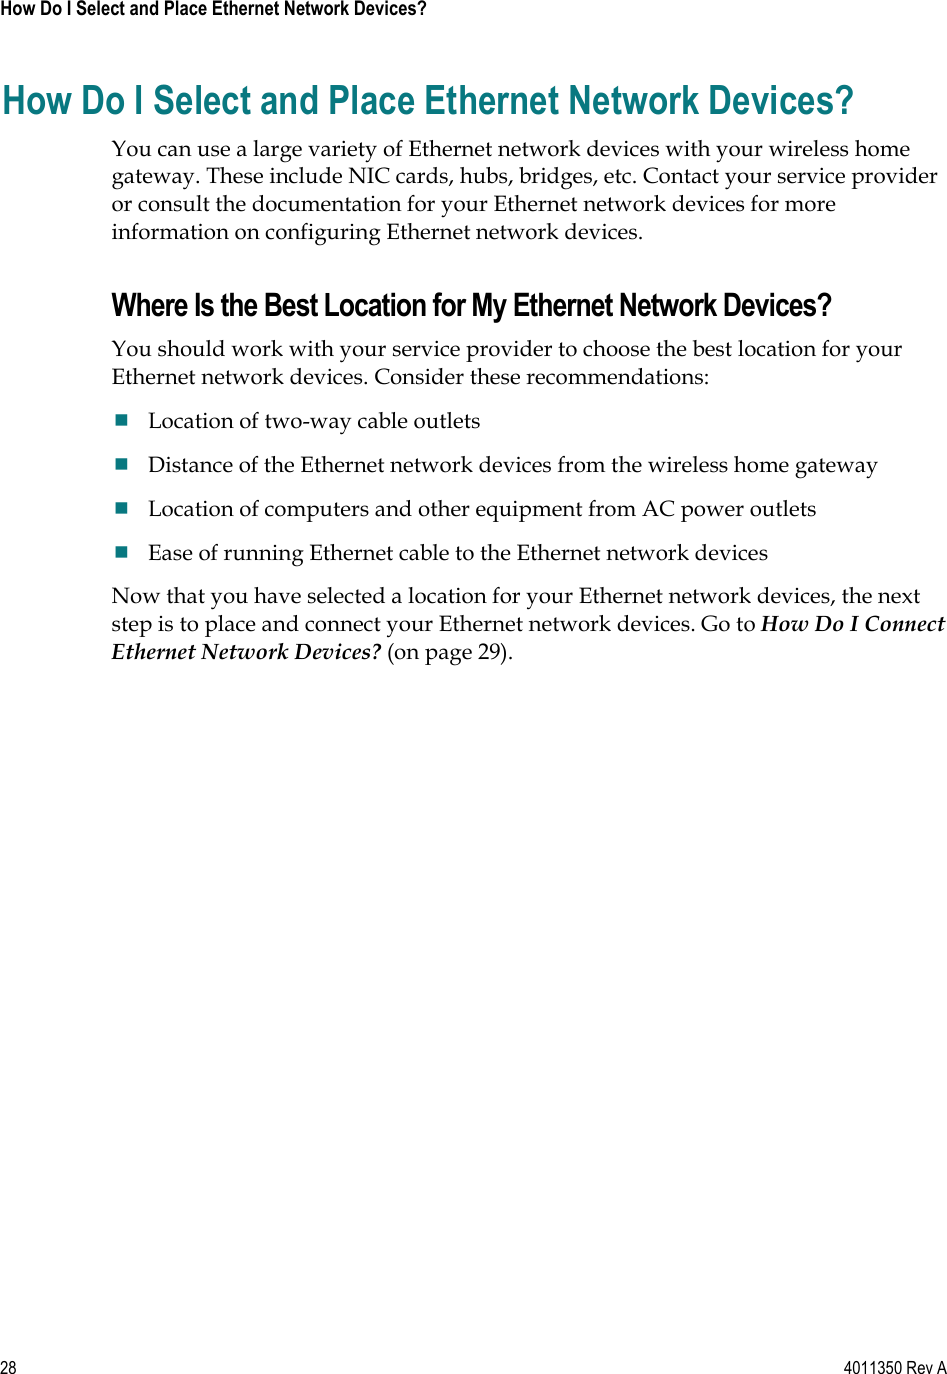 28    4011350 Rev A How Do I Select and Place Ethernet Network Devices? How Do I Select and Place Ethernet Network Devices? You can use a large variety of Ethernet network devices with your wireless home gateway. These include NIC cards, hubs, bridges, etc. Contact your service provider or consult the documentation for your Ethernet network devices for more information on configuring Ethernet network devices. Where Is the Best Location for My Ethernet Network Devices? You should work with your service provider to choose the best location for your Ethernet network devices. Consider these recommendations: Location of two-way cable outlets Distance of the Ethernet network devices from the wireless home gateway Location of computers and other equipment from AC power outlets Ease of running Ethernet cable to the Ethernet network devices Now that you have selected a location for your Ethernet network devices, the next step is to place and connect your Ethernet network devices. Go to How Do I Connect Ethernet Network Devices? (on page 29).